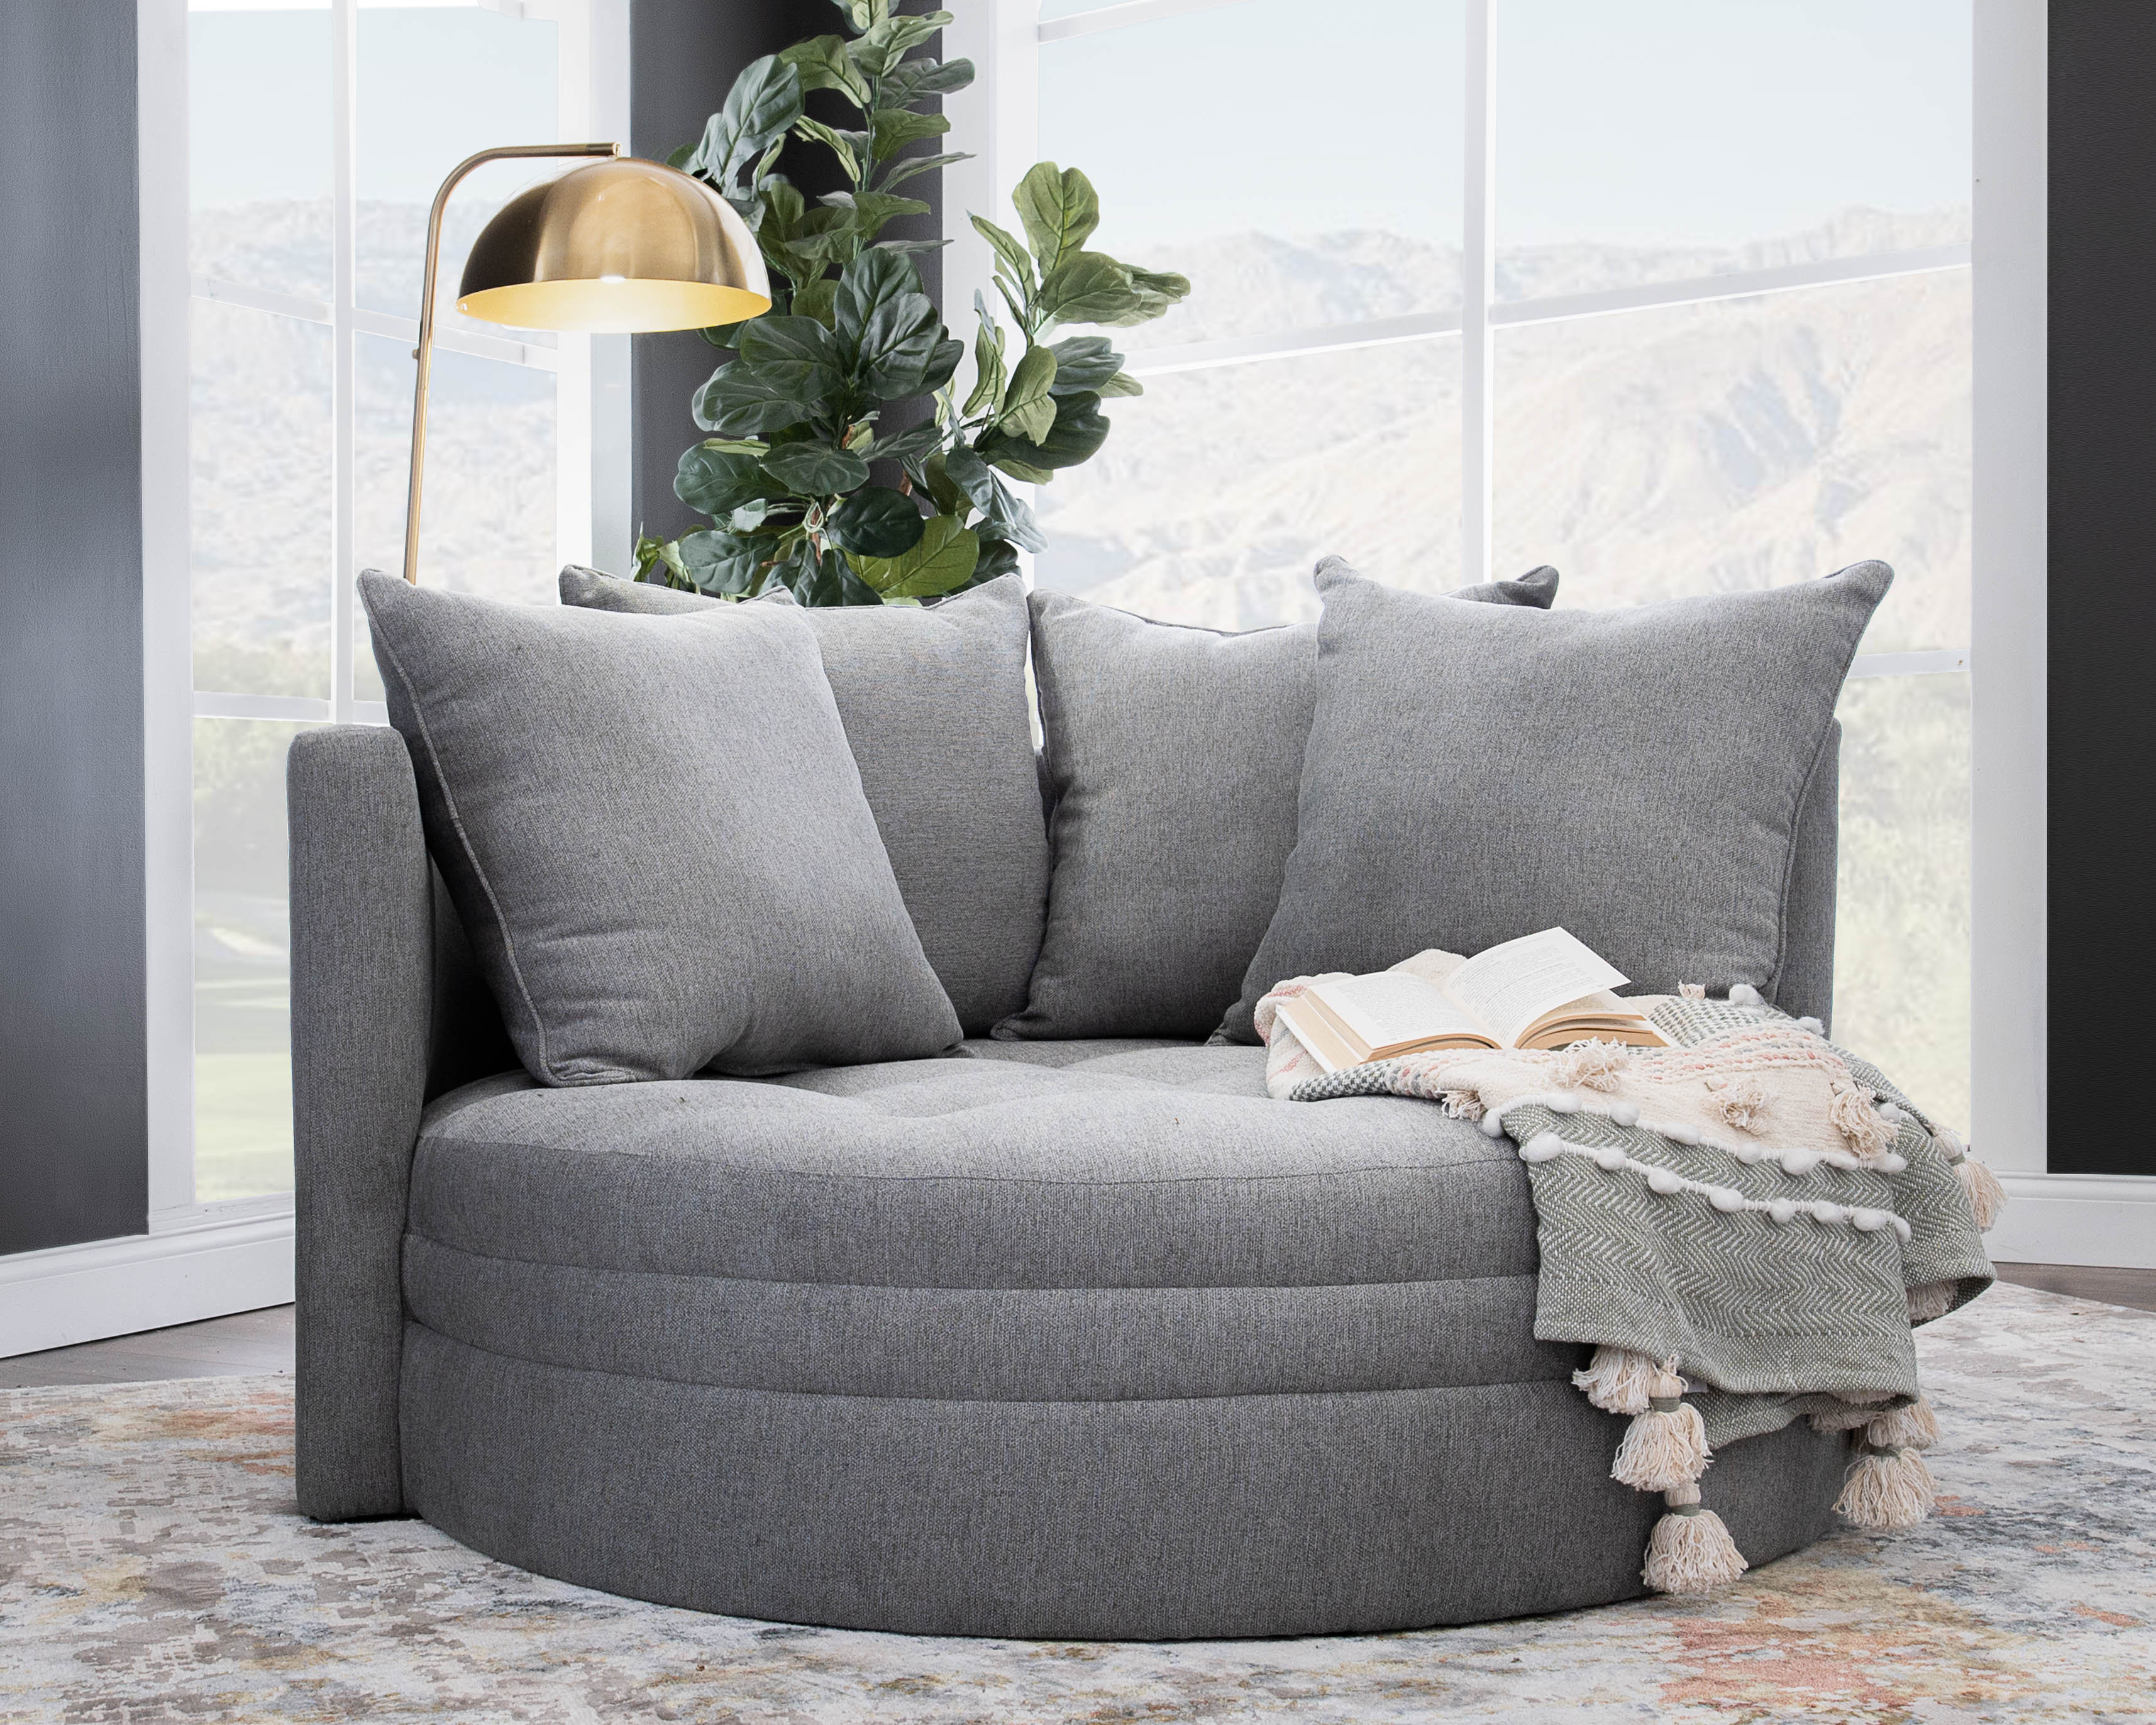 Home by Sean & Catherine Lowe Kennedy Barrel Chair Upholstery: Wolf